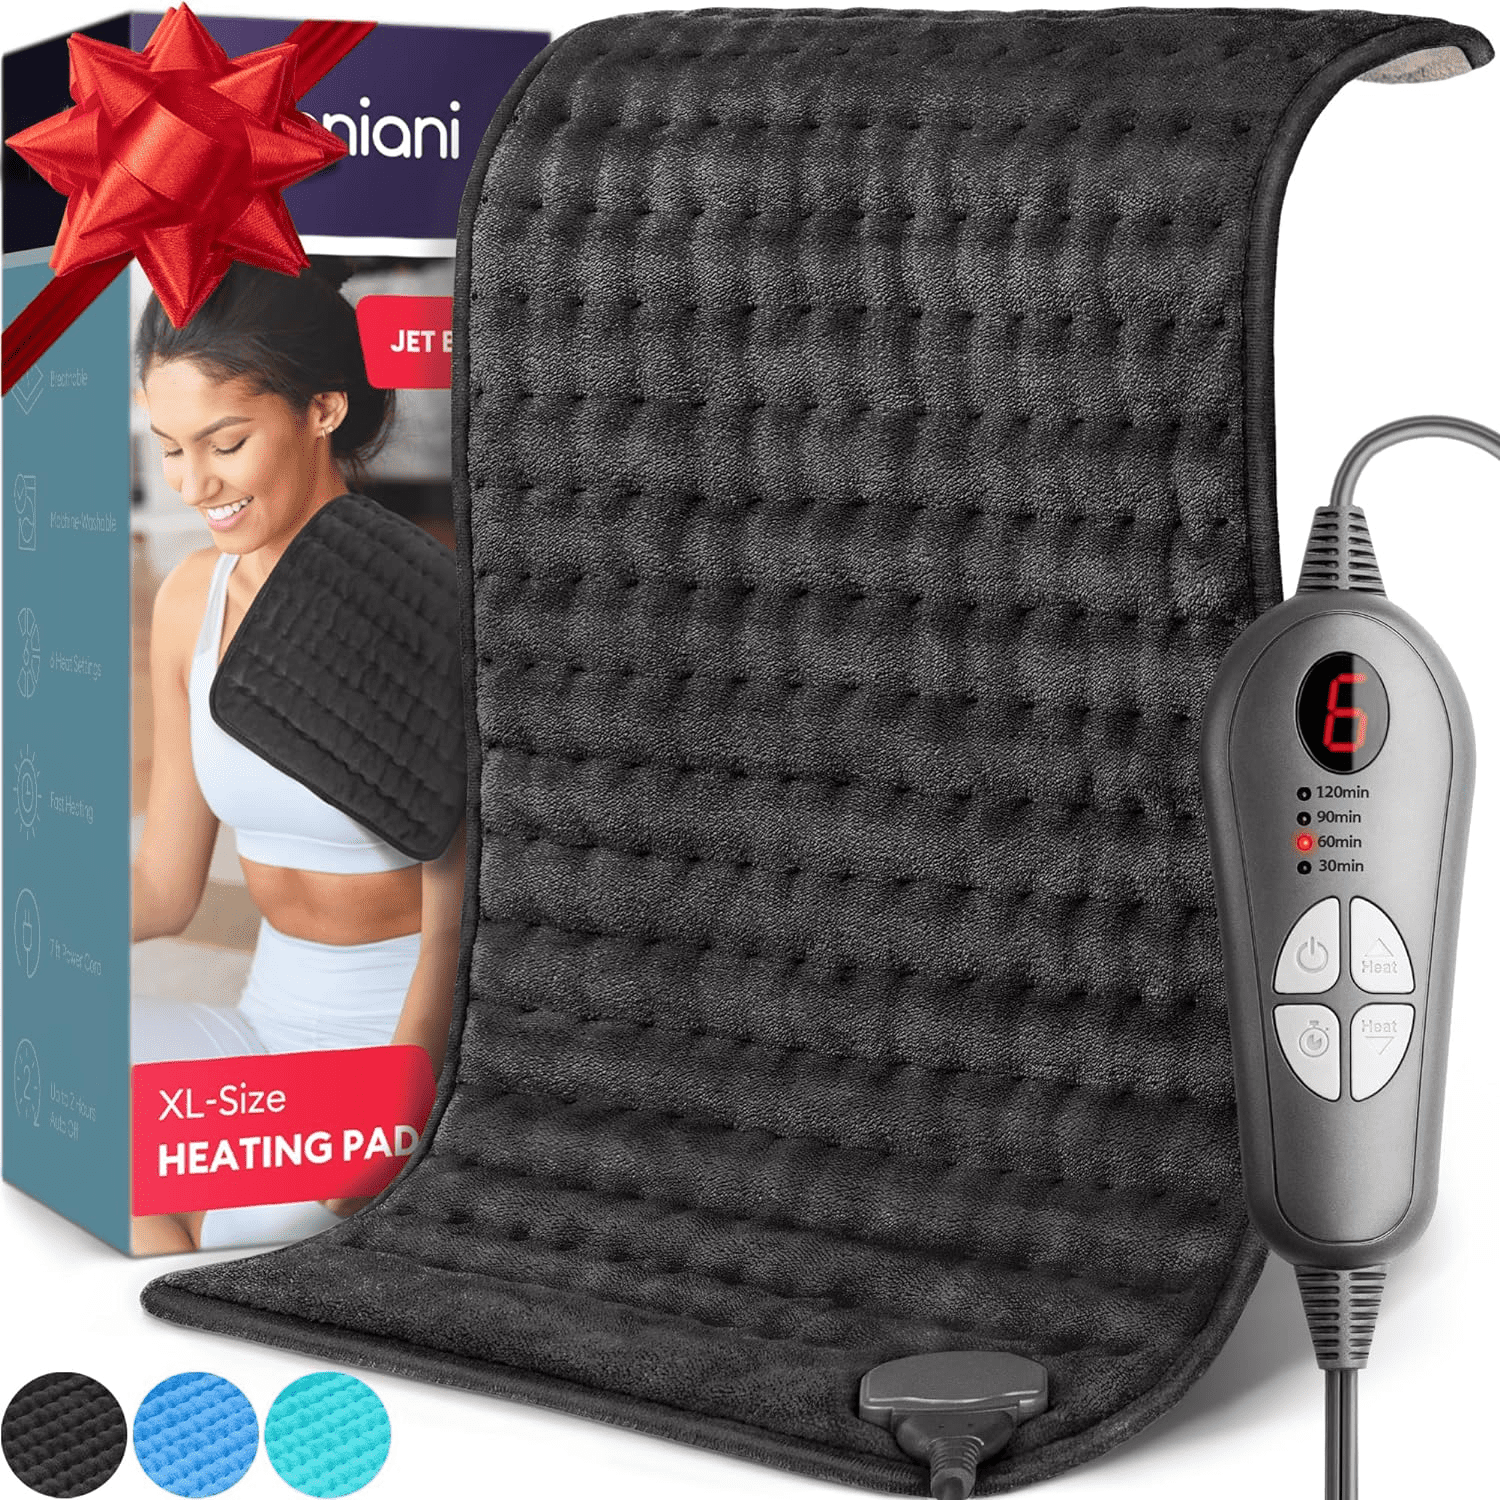 Double Sided XL Electric Heating Pad for Back Pain & Cramps Relief, Heat Pad with 6 Heat Settings, Auto Shut Off, Machine Washable, Ultra Soft, Gifts for Women, Gifts for Men (12"x24" Jet Black)